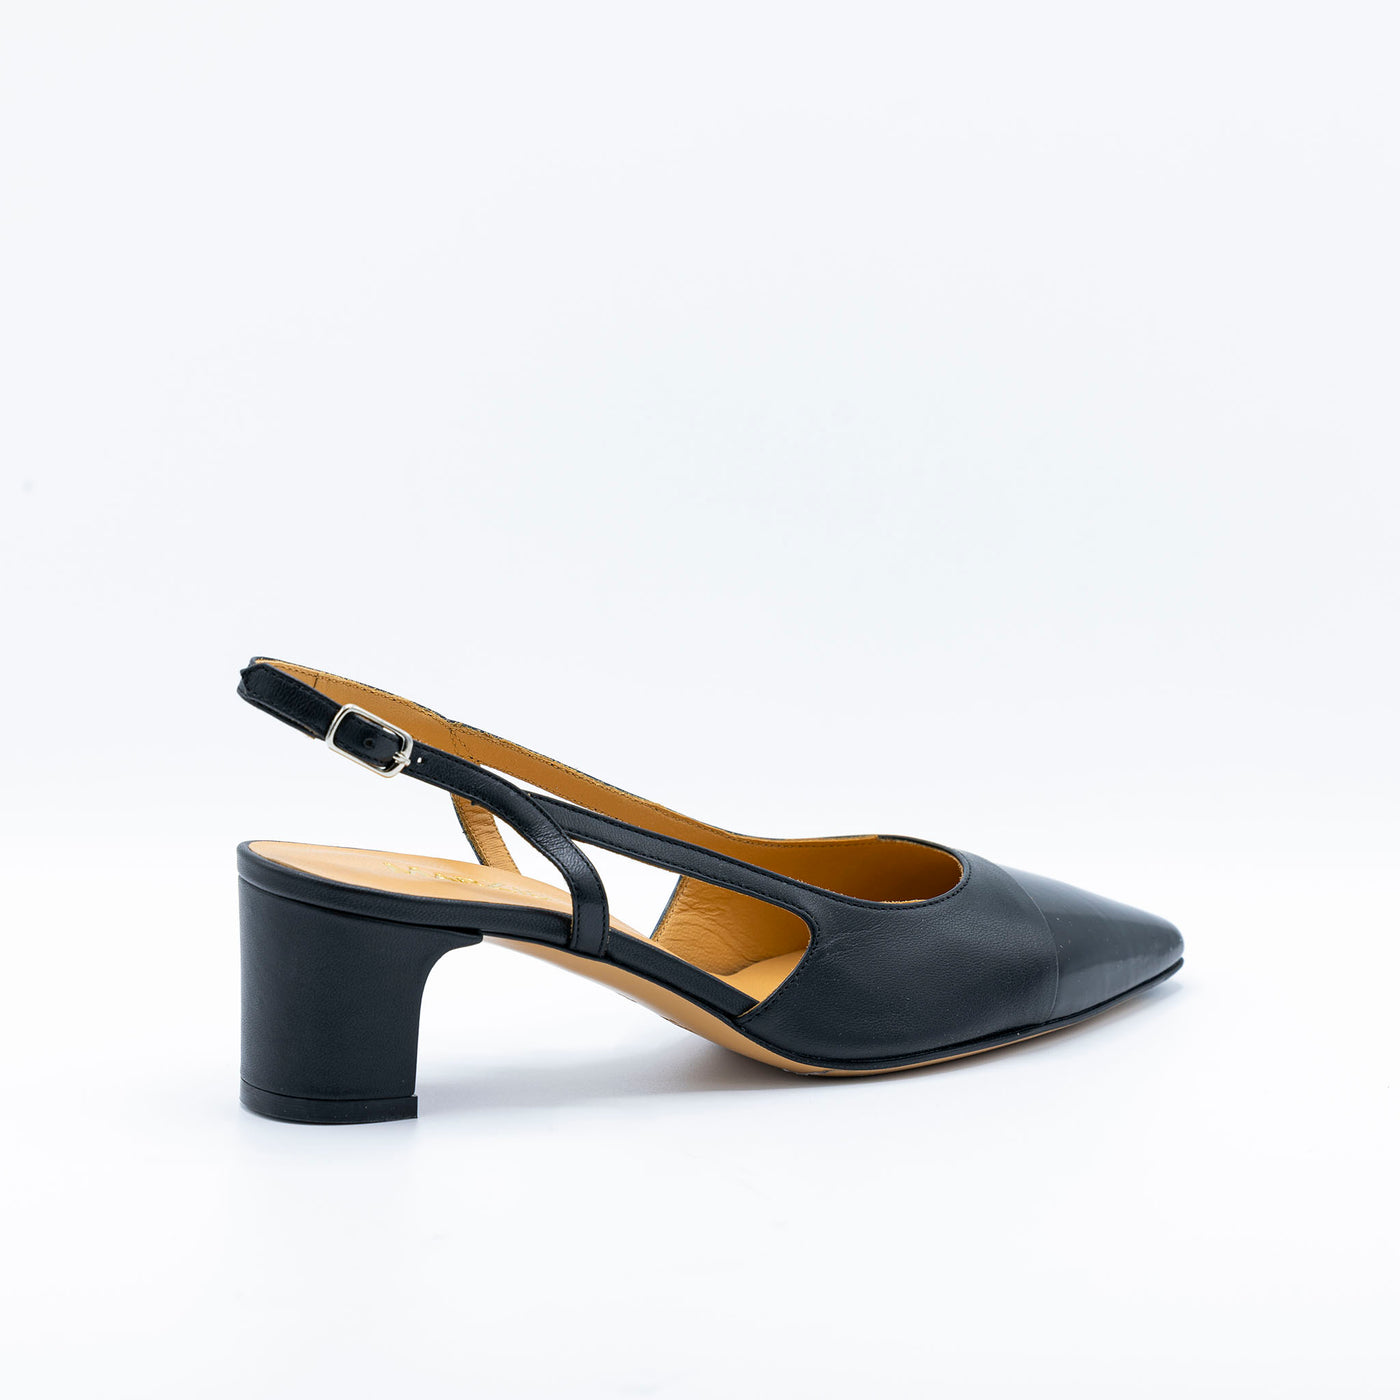 Two-Tone Slingback in Black Leather